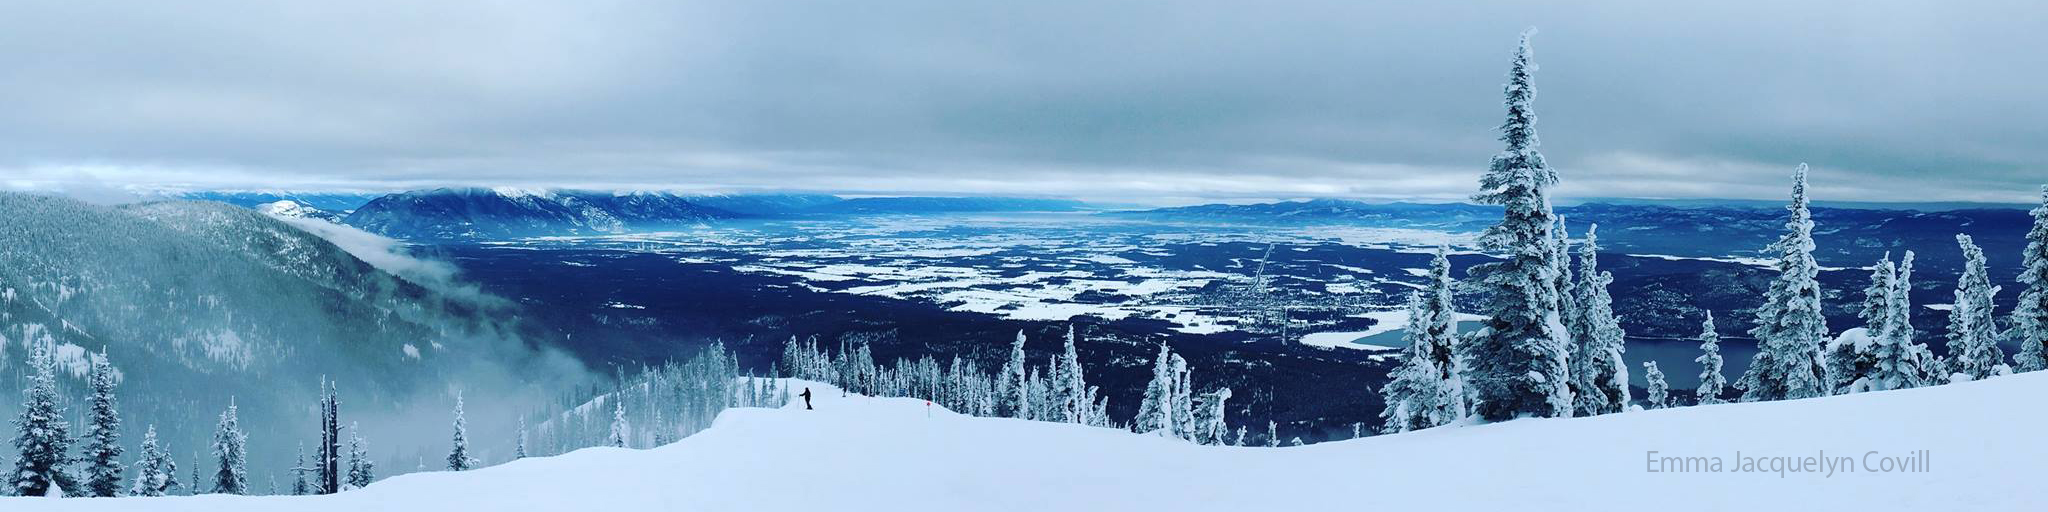 Scenic view taken from Big Mountain located in Whitefish